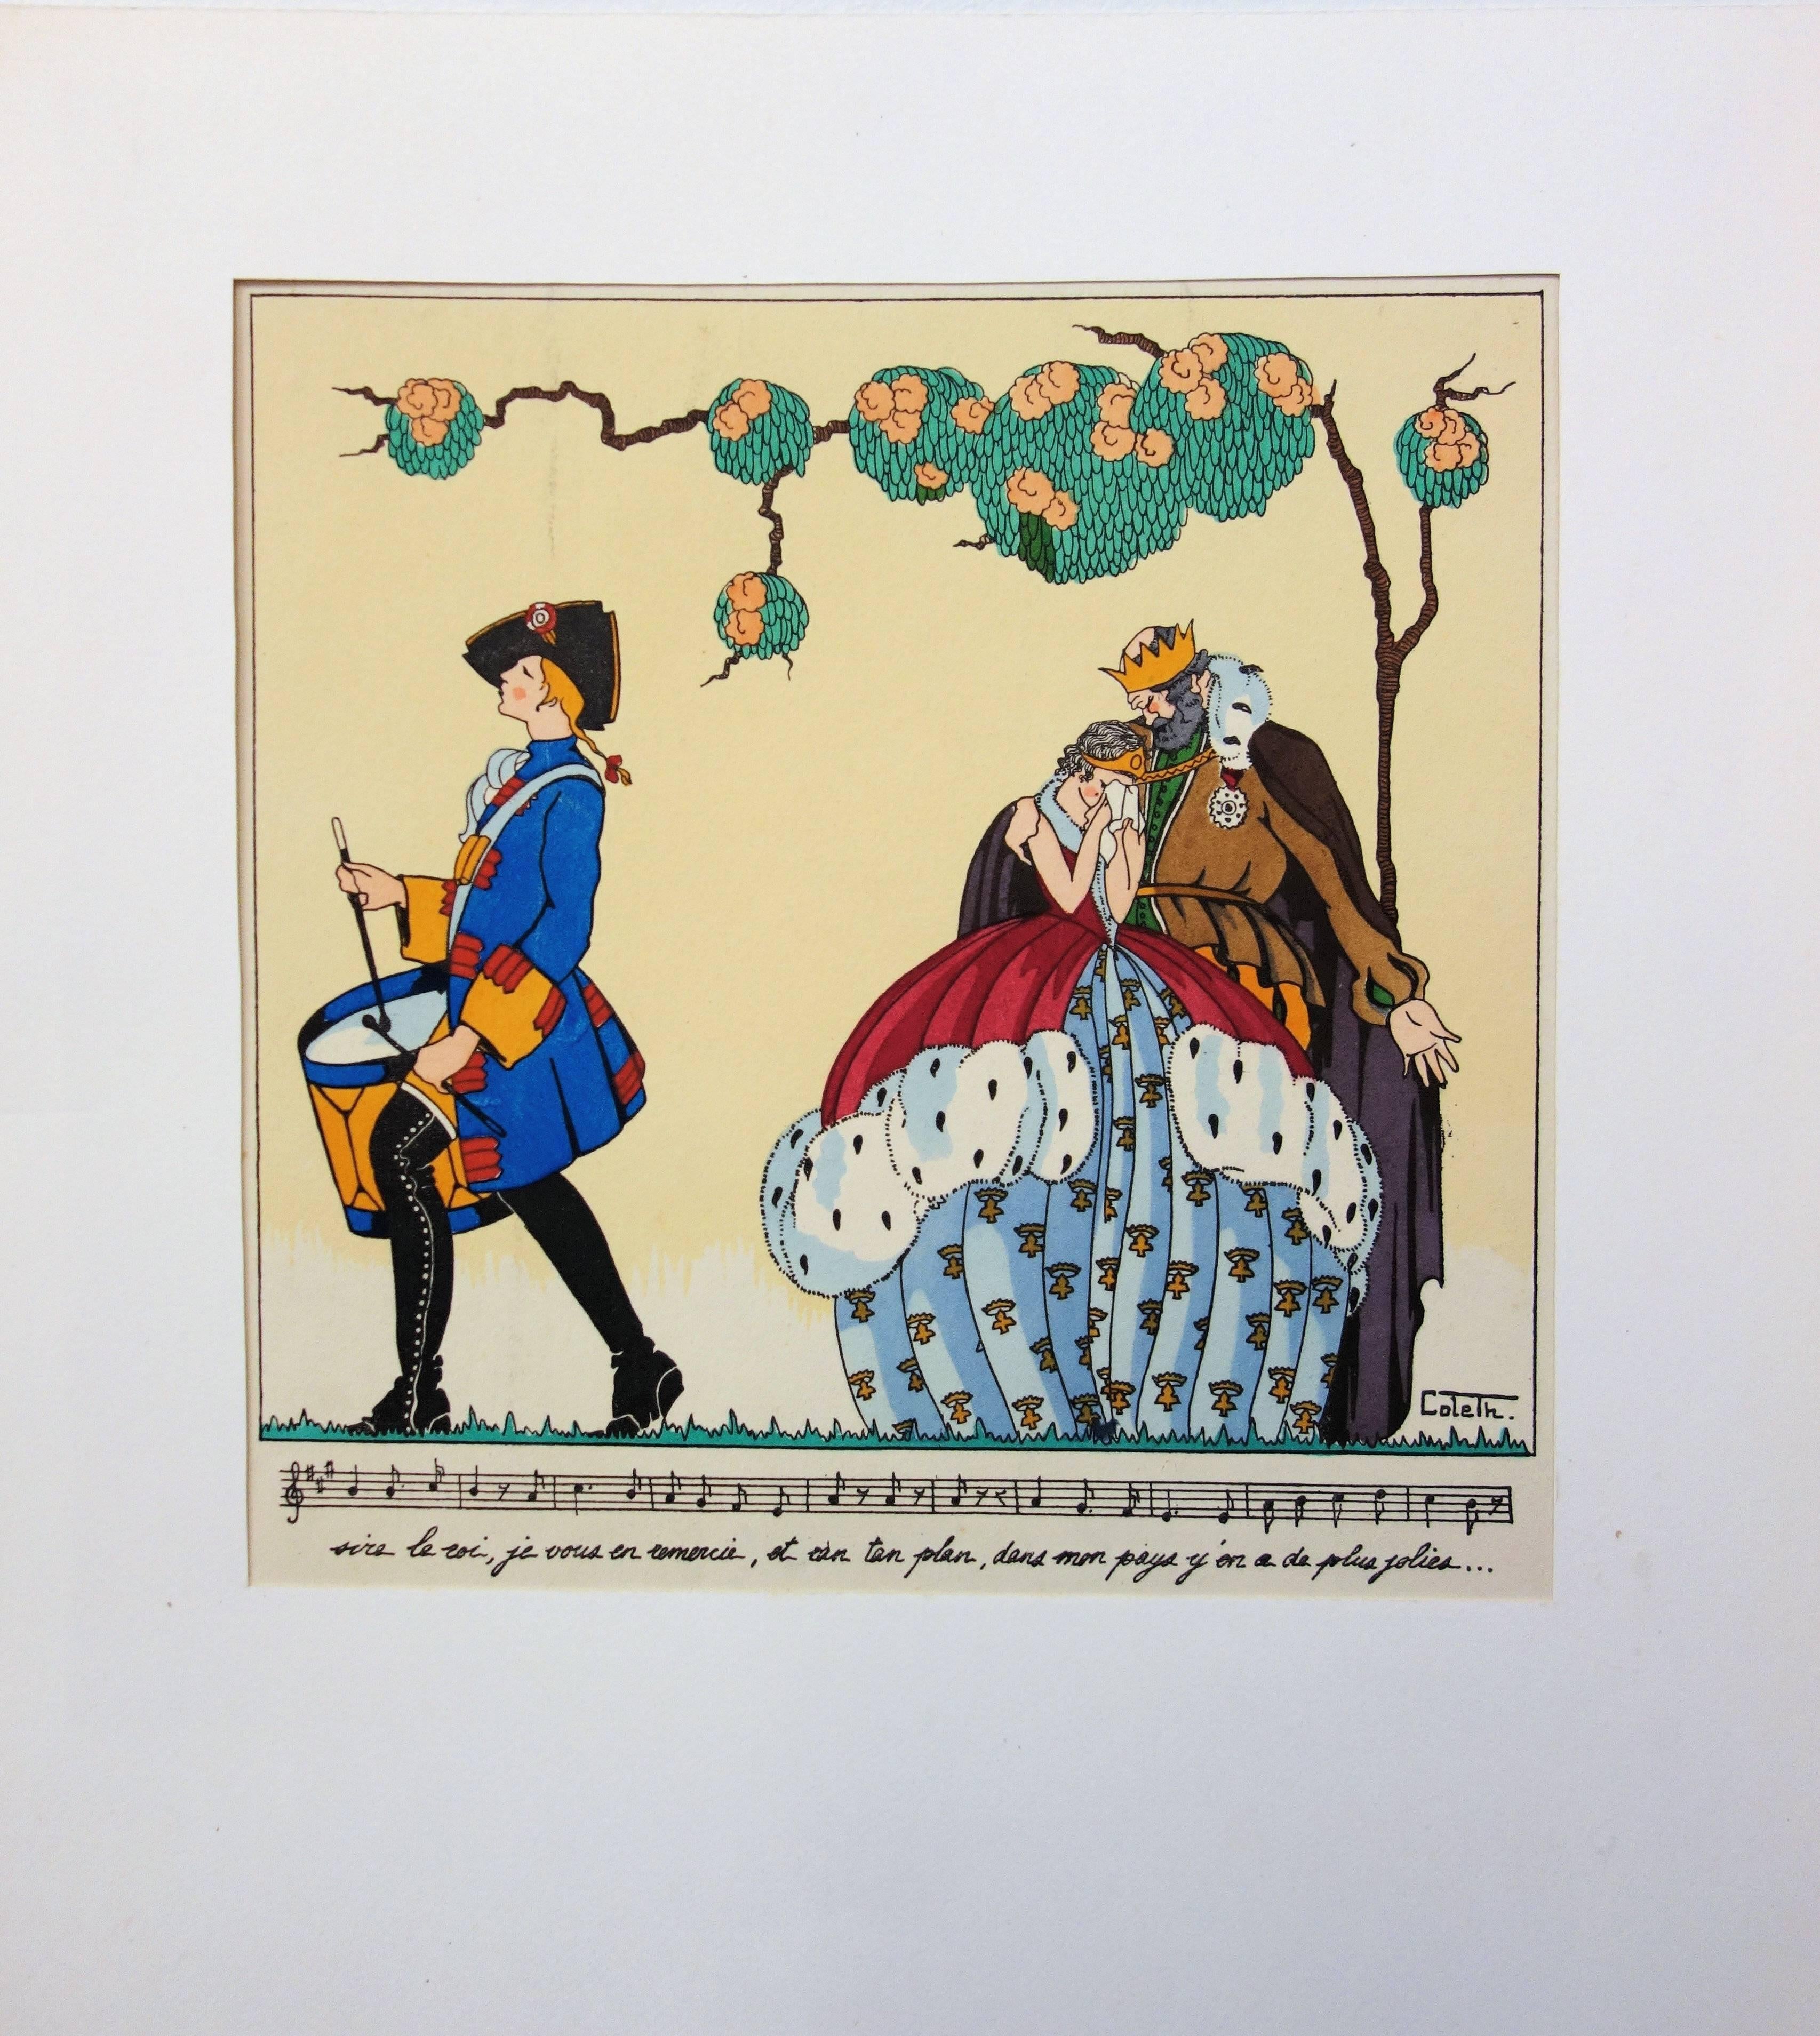 Unknown Figurative Print - Coleth : King, Queen and Musician - Original pochoir